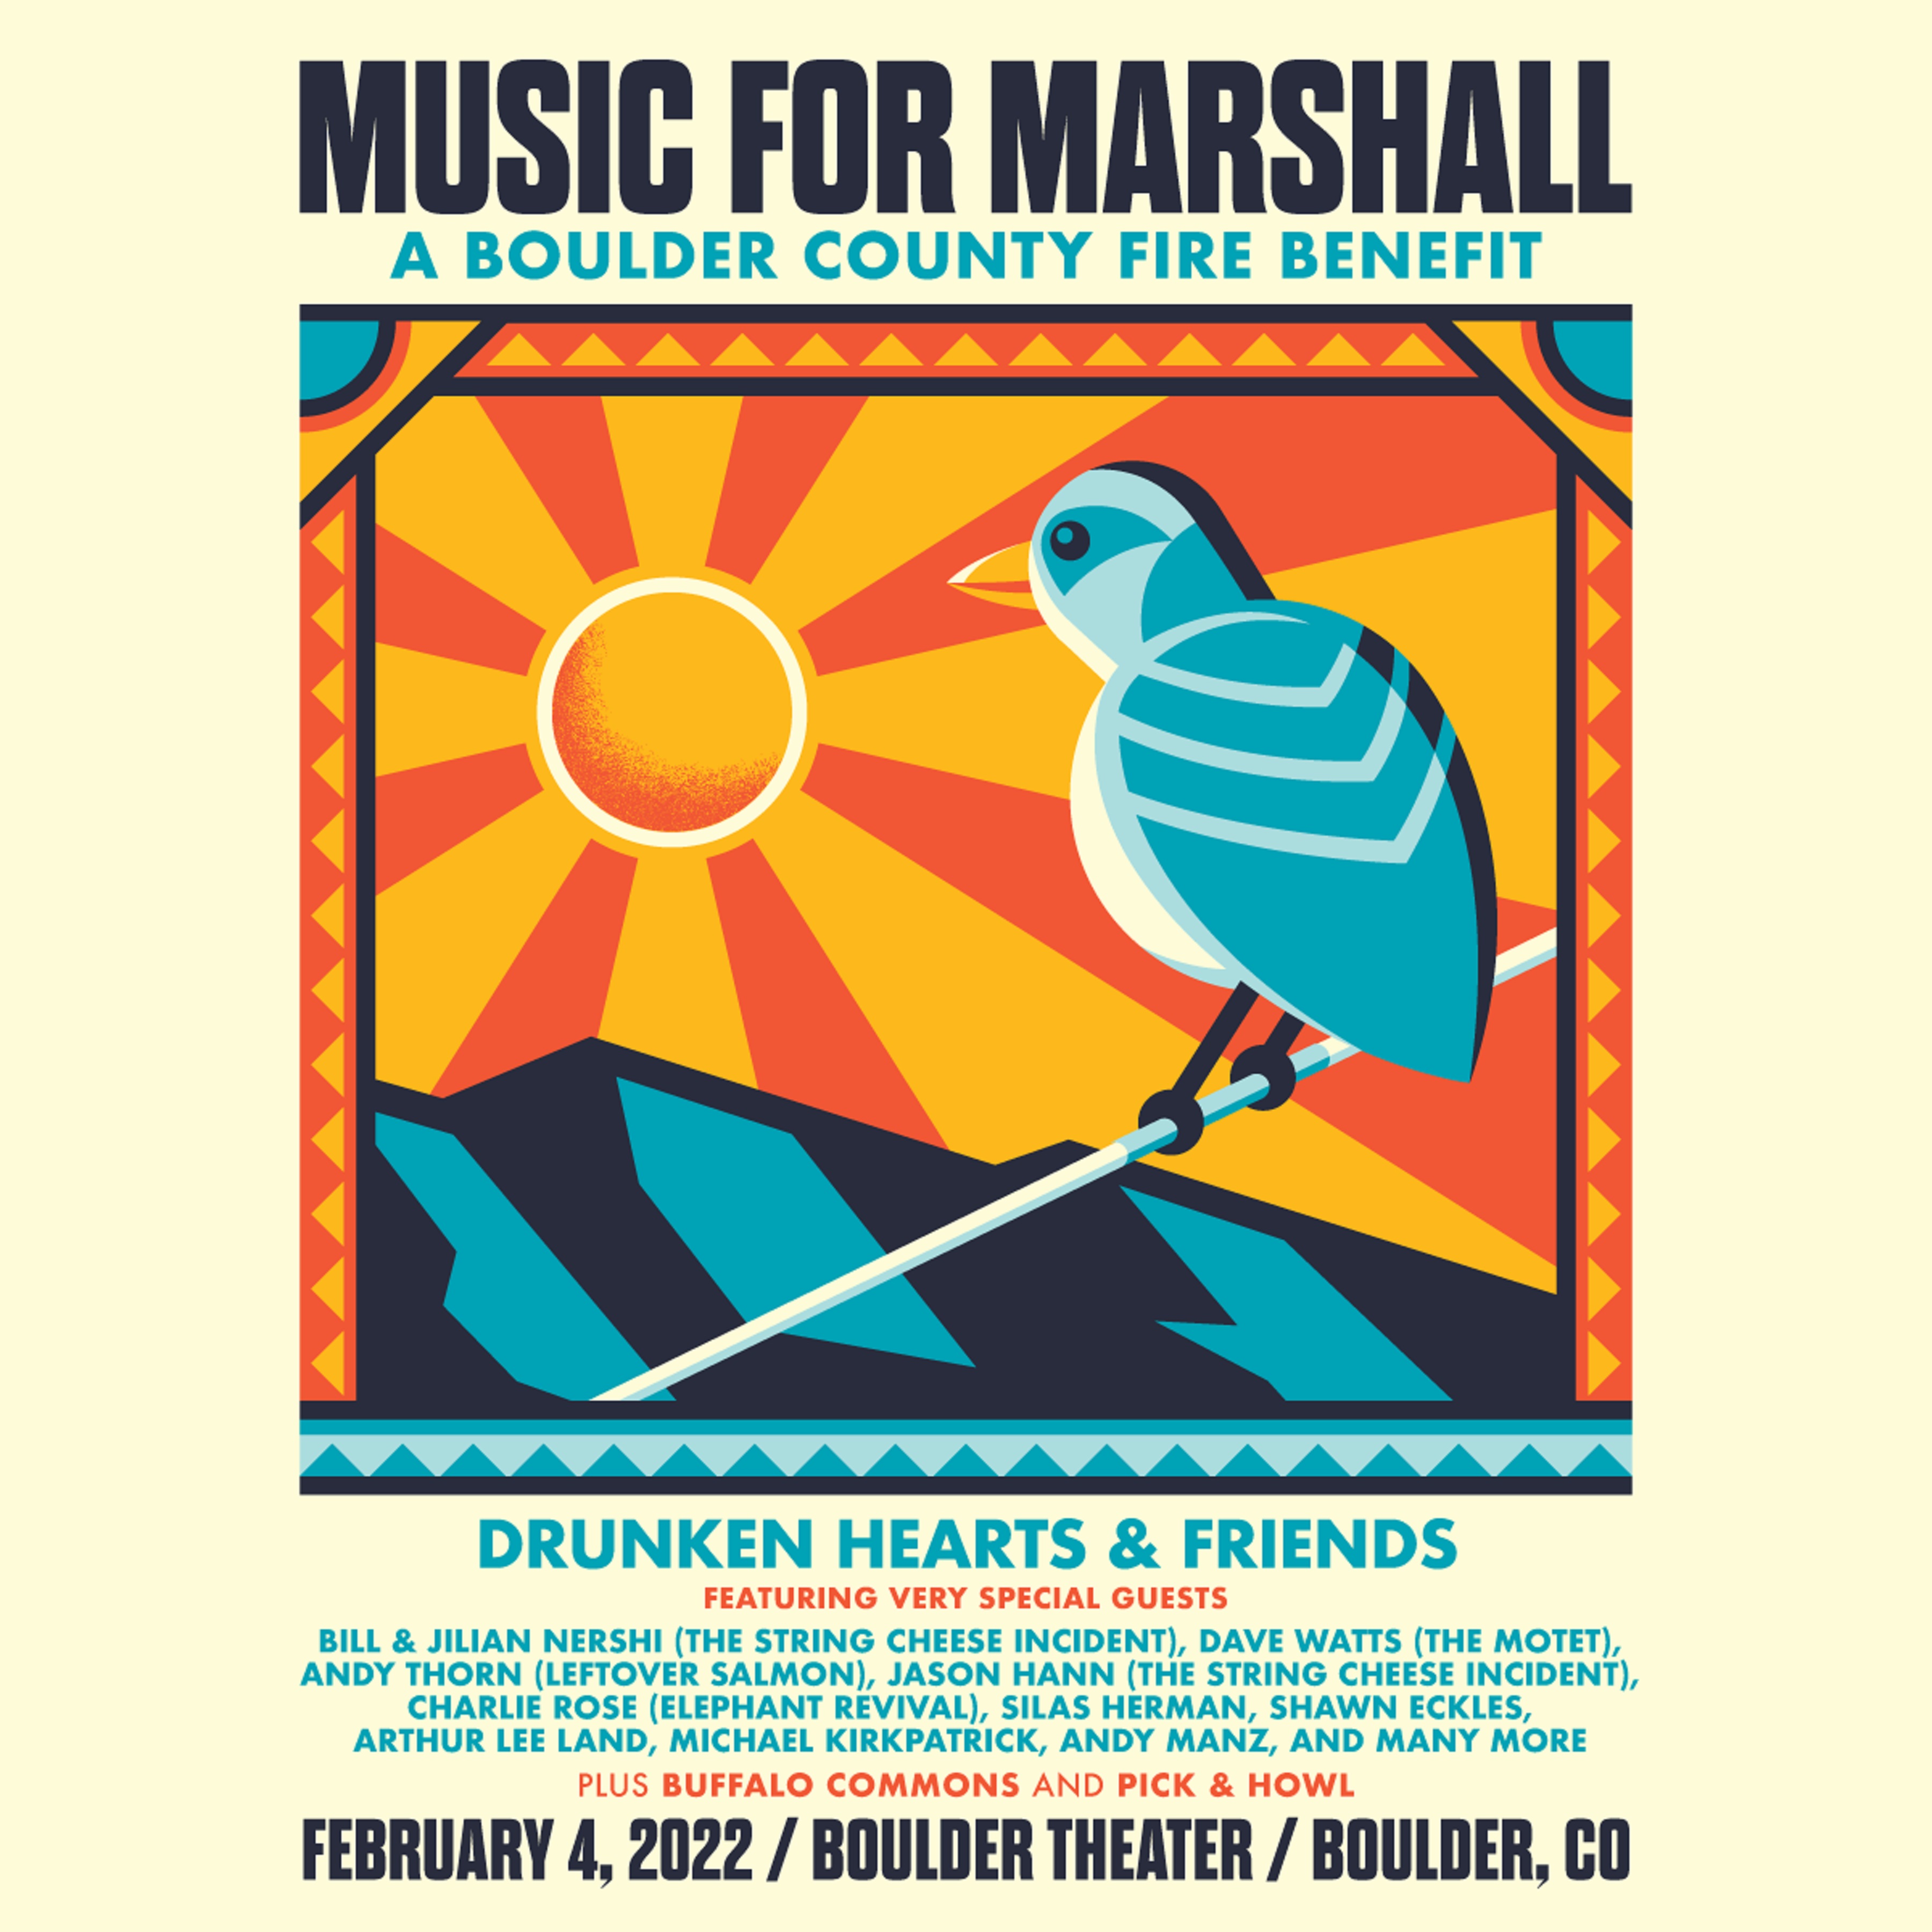 MUSIC FOR MARSHALL with DRUNKEN HEARTS & FRIENDS